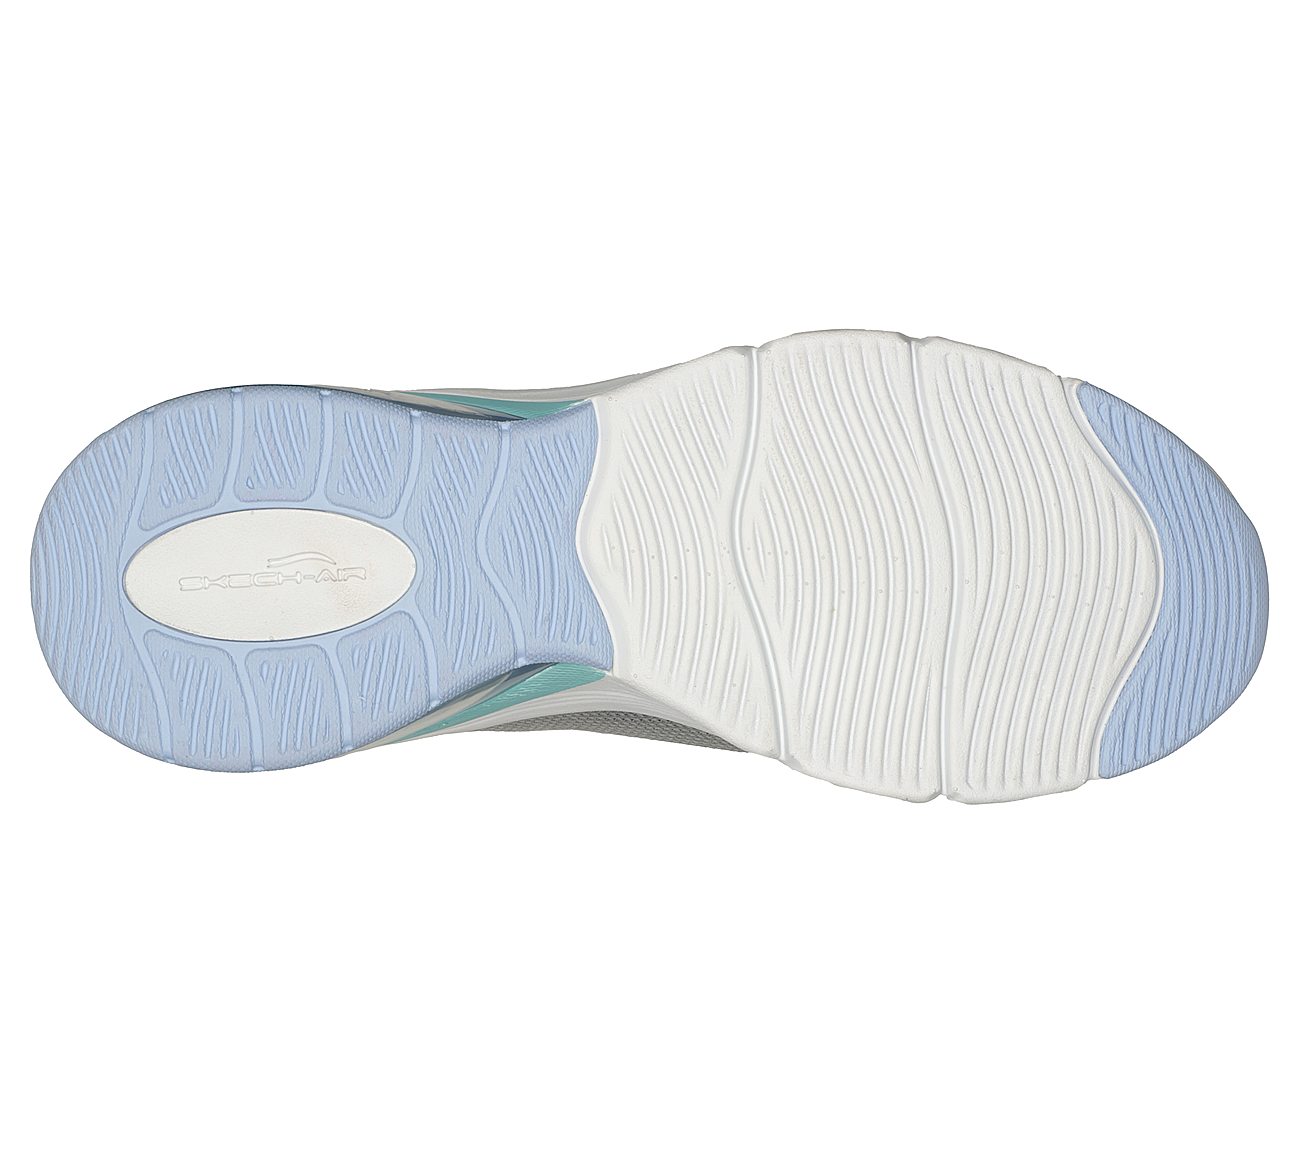 SKECH-AIR EXTREME 2.0-CLASSIC, GREY/MINT Footwear Bottom View